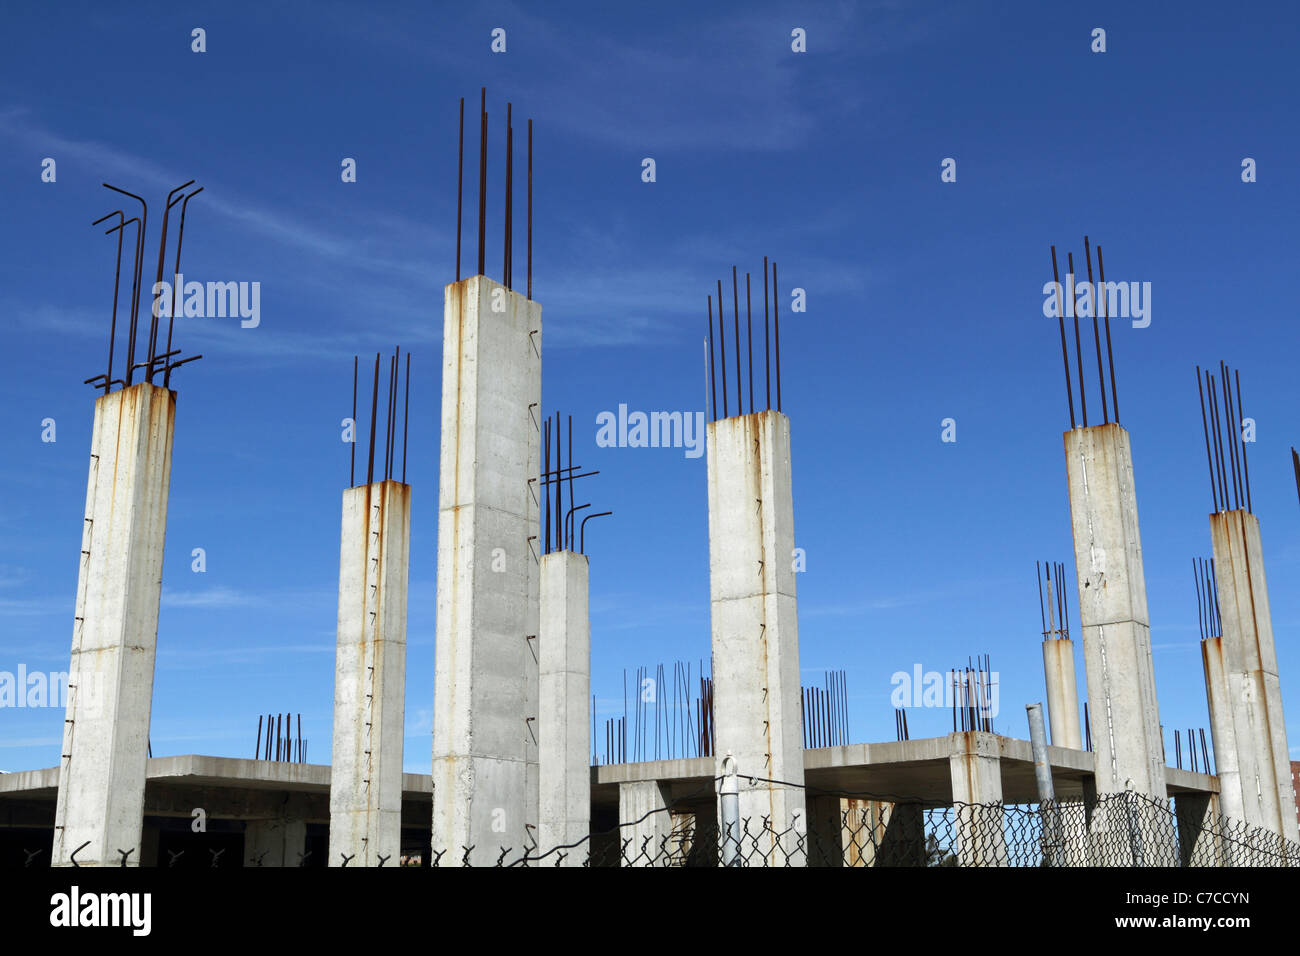 Reinforced concrete structural columns at a construction site where worked had been stopped due to the current economic slowdown Stock Photo